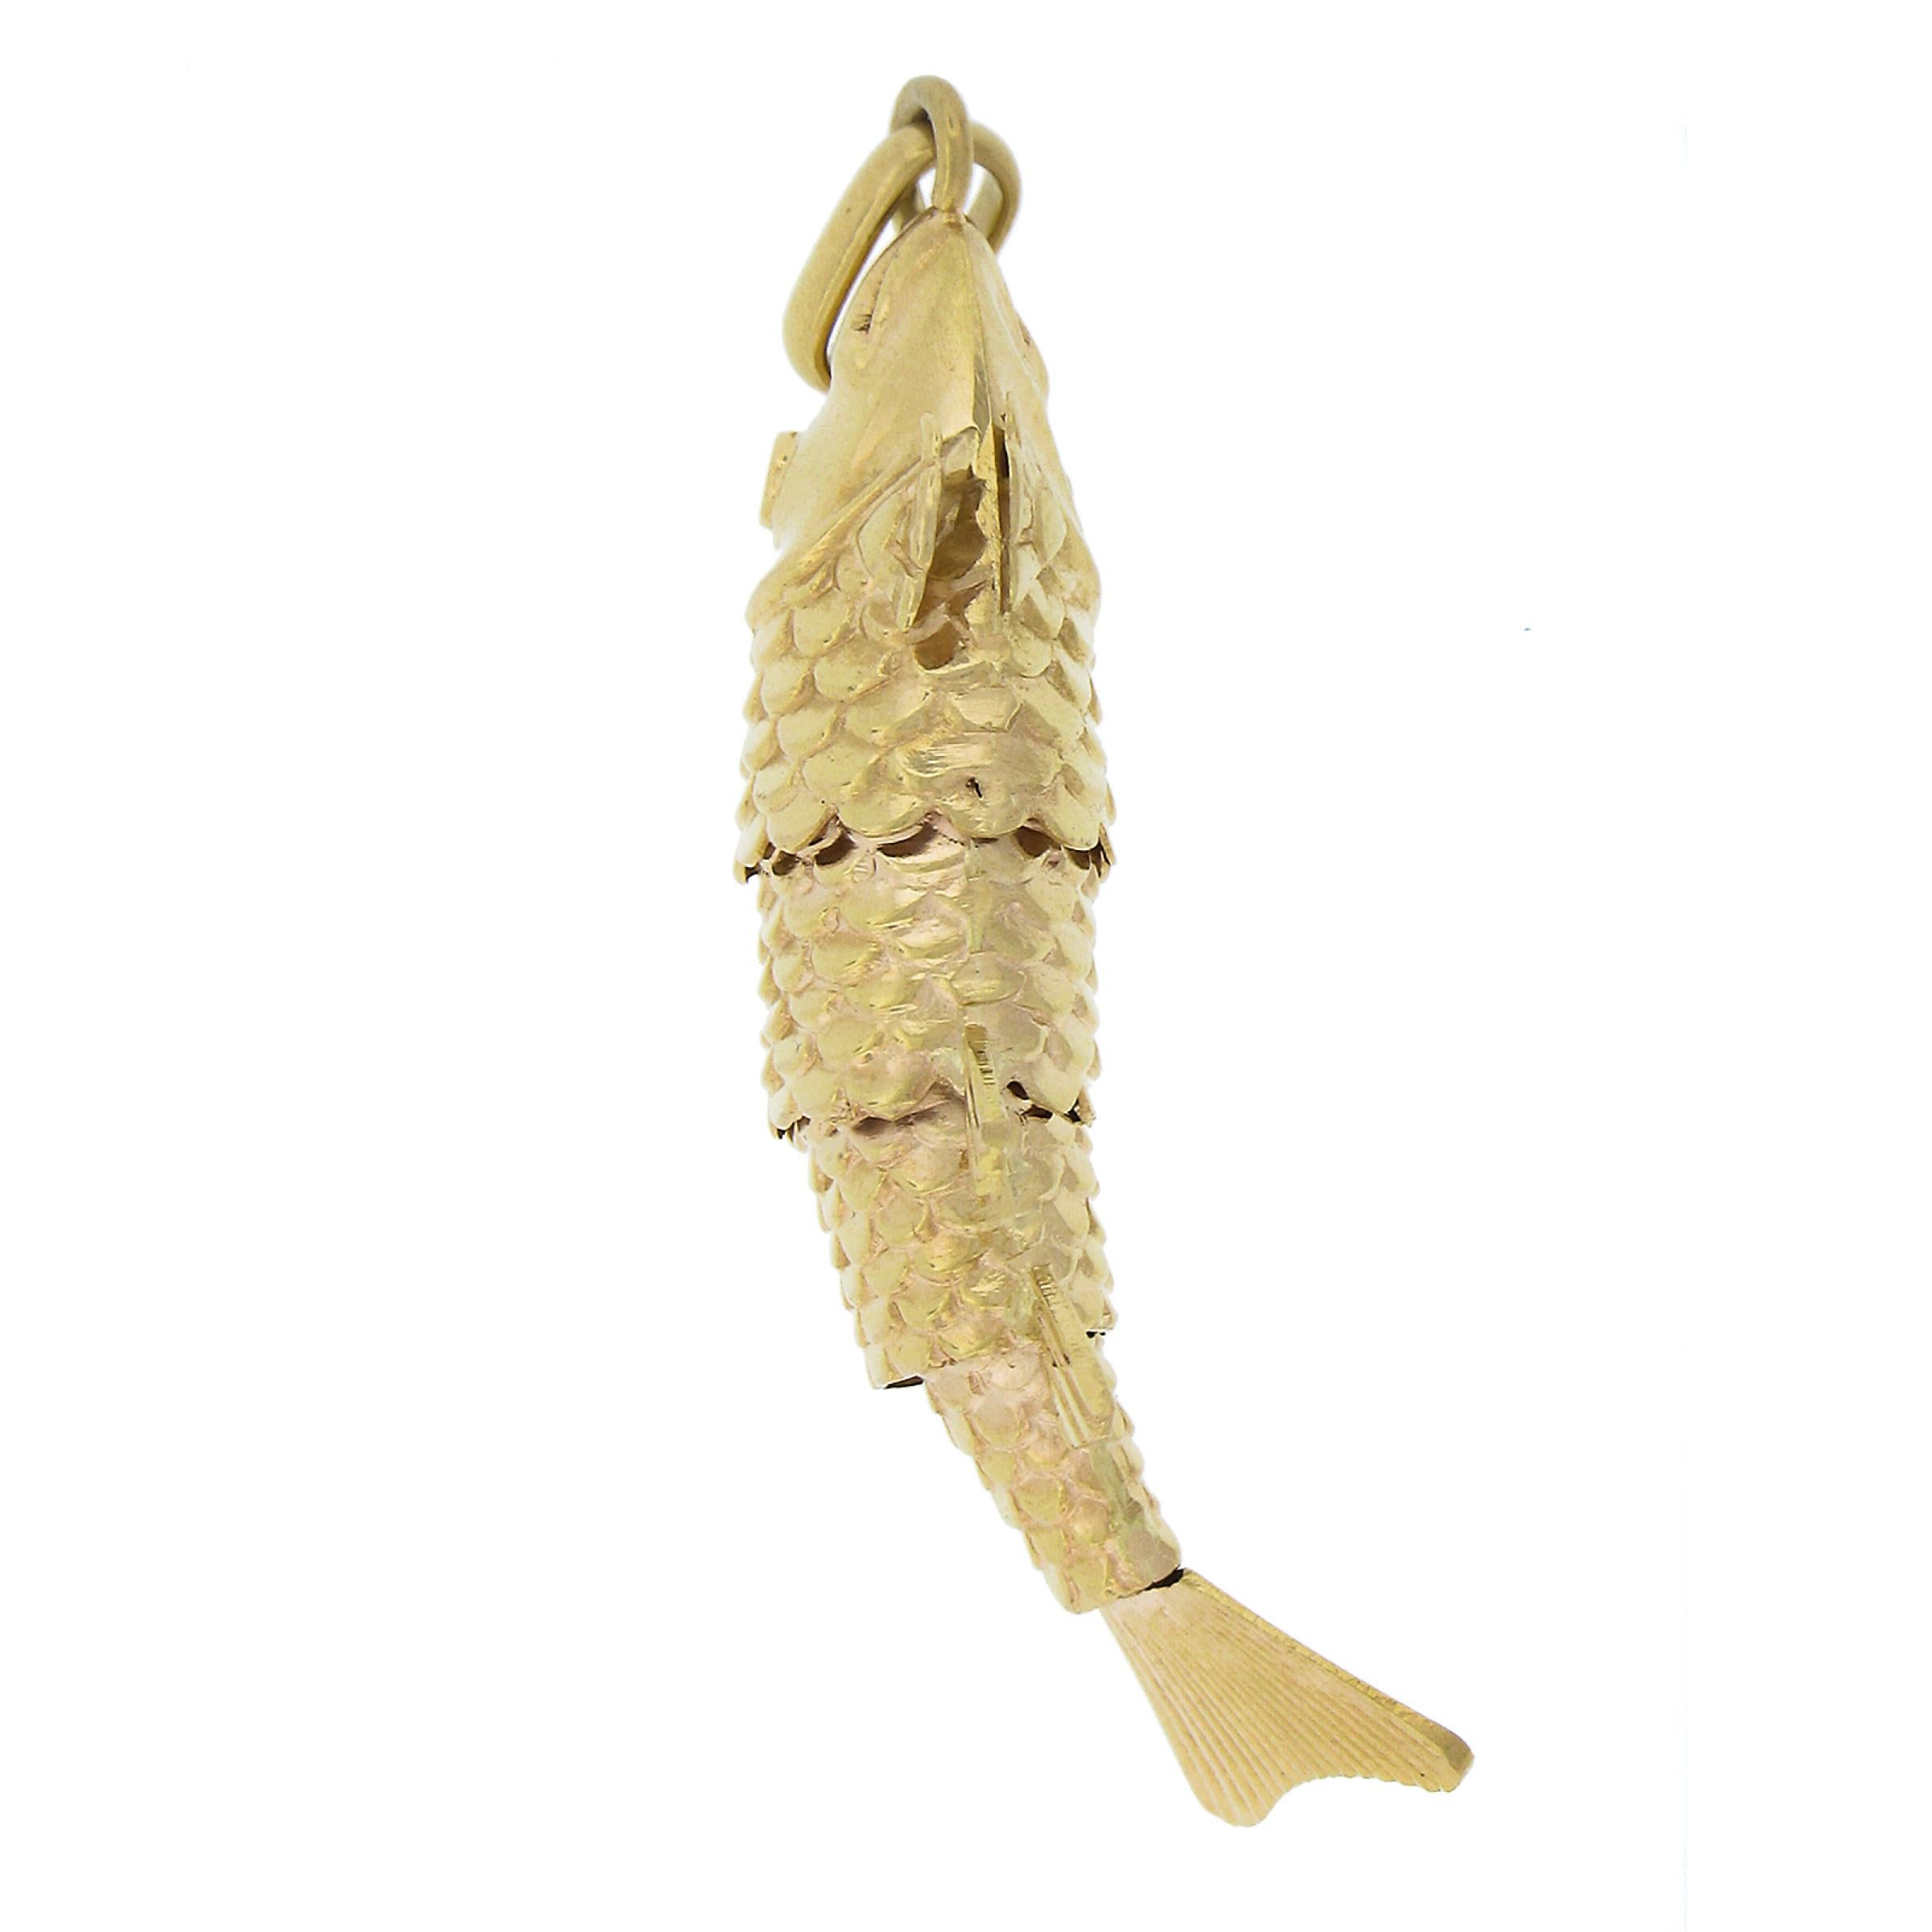 18K Gold Flexible Detailed Fluted Tail & Scales on Body Fish Charm Pendant For Sale 1